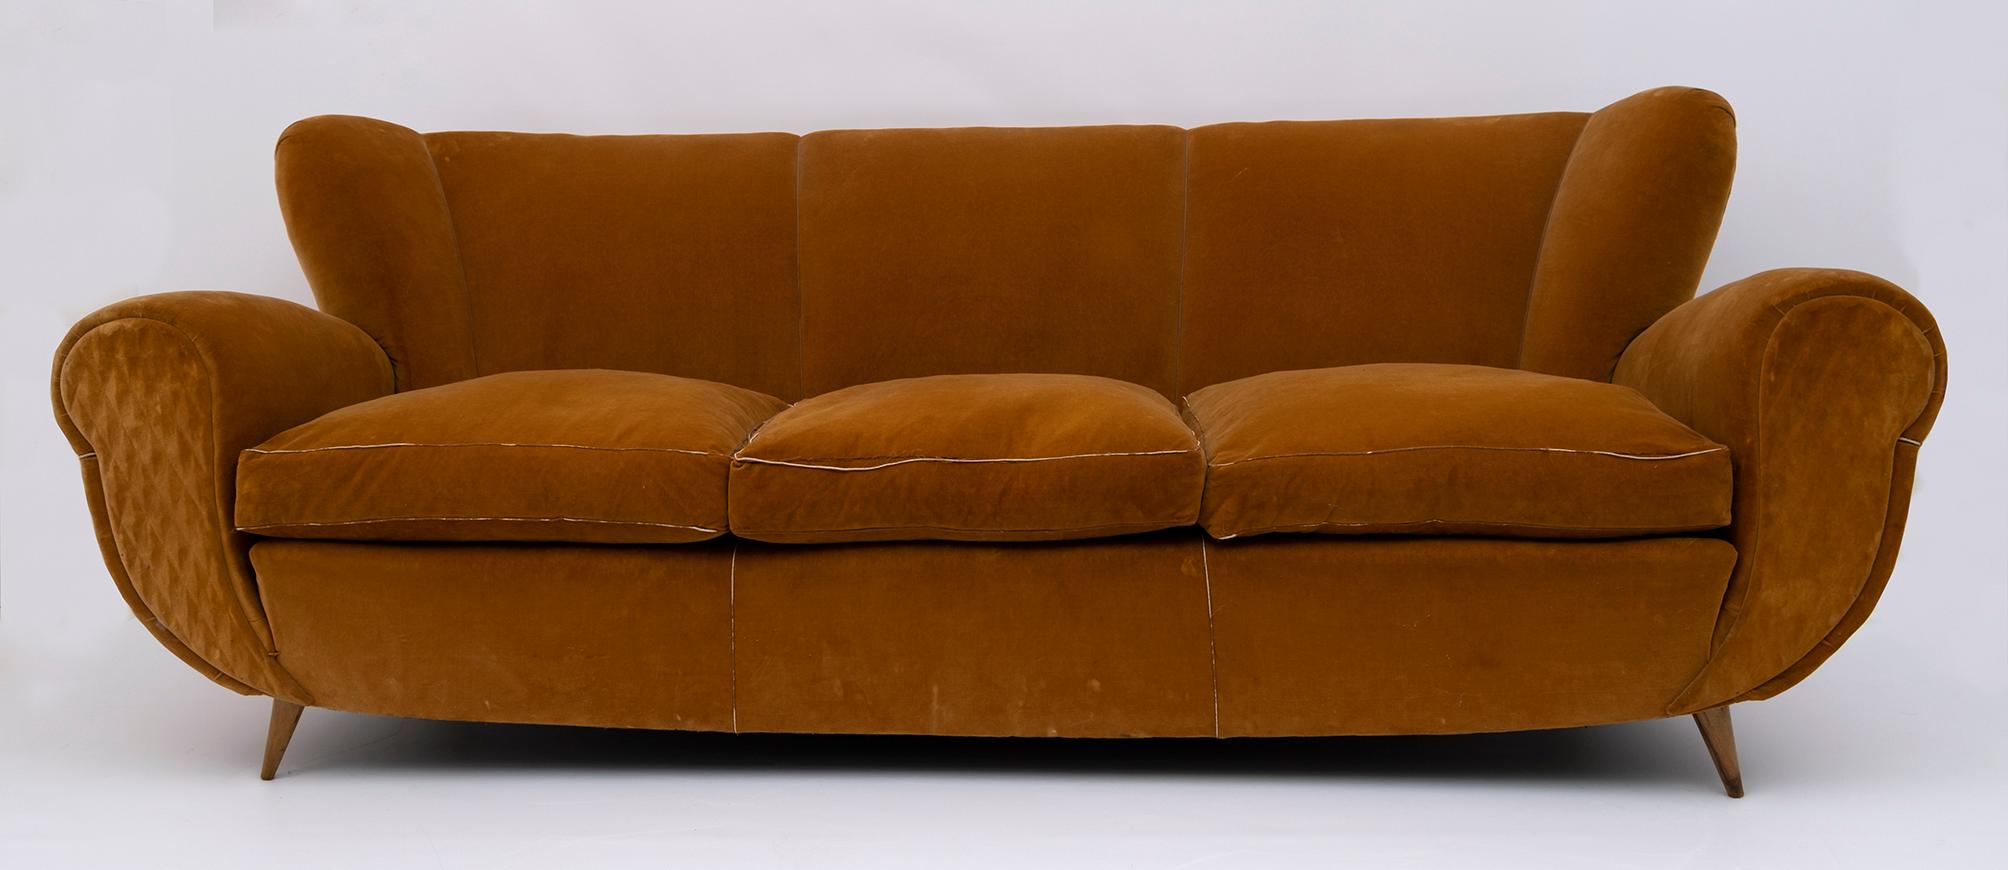 Particular pair of armchairs and three-seater sofa, designed by the famous architect Guglielmo Ulrich. Production of the 1940s in Art Deco style.
The upholstery is original from the time but it is recommended to replace it, as you can see in the